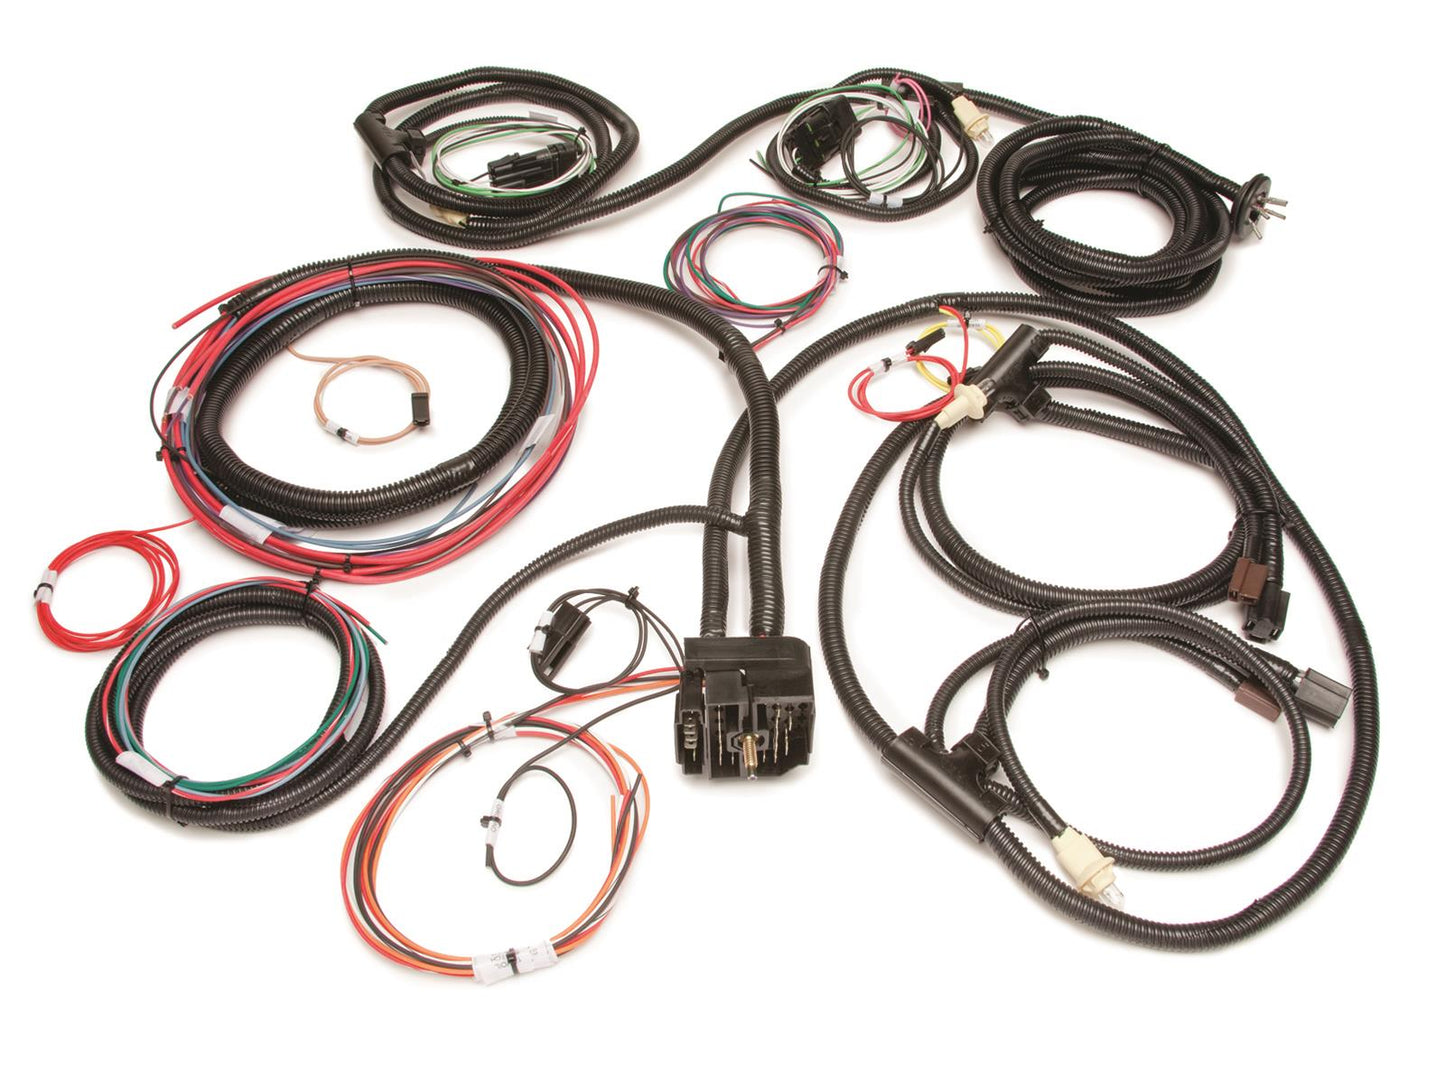 Painless Performance 21-Circuit Direct-Fit Jeep CJ Harnesses 10150 for 1975-1986 Jeep Trucks